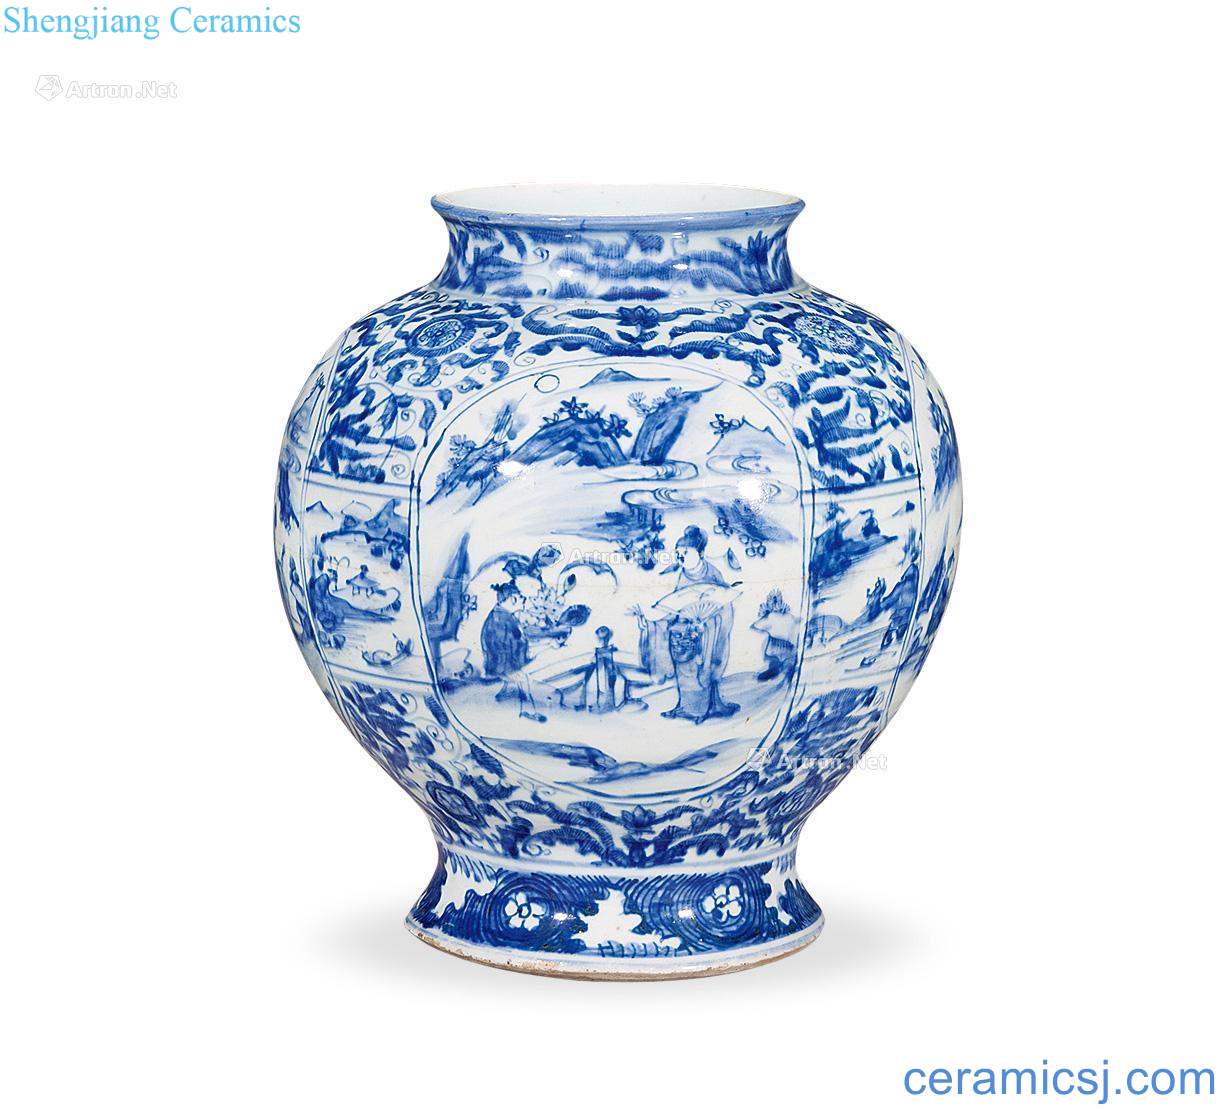 Ming Stories of blue and white medallion figure cans